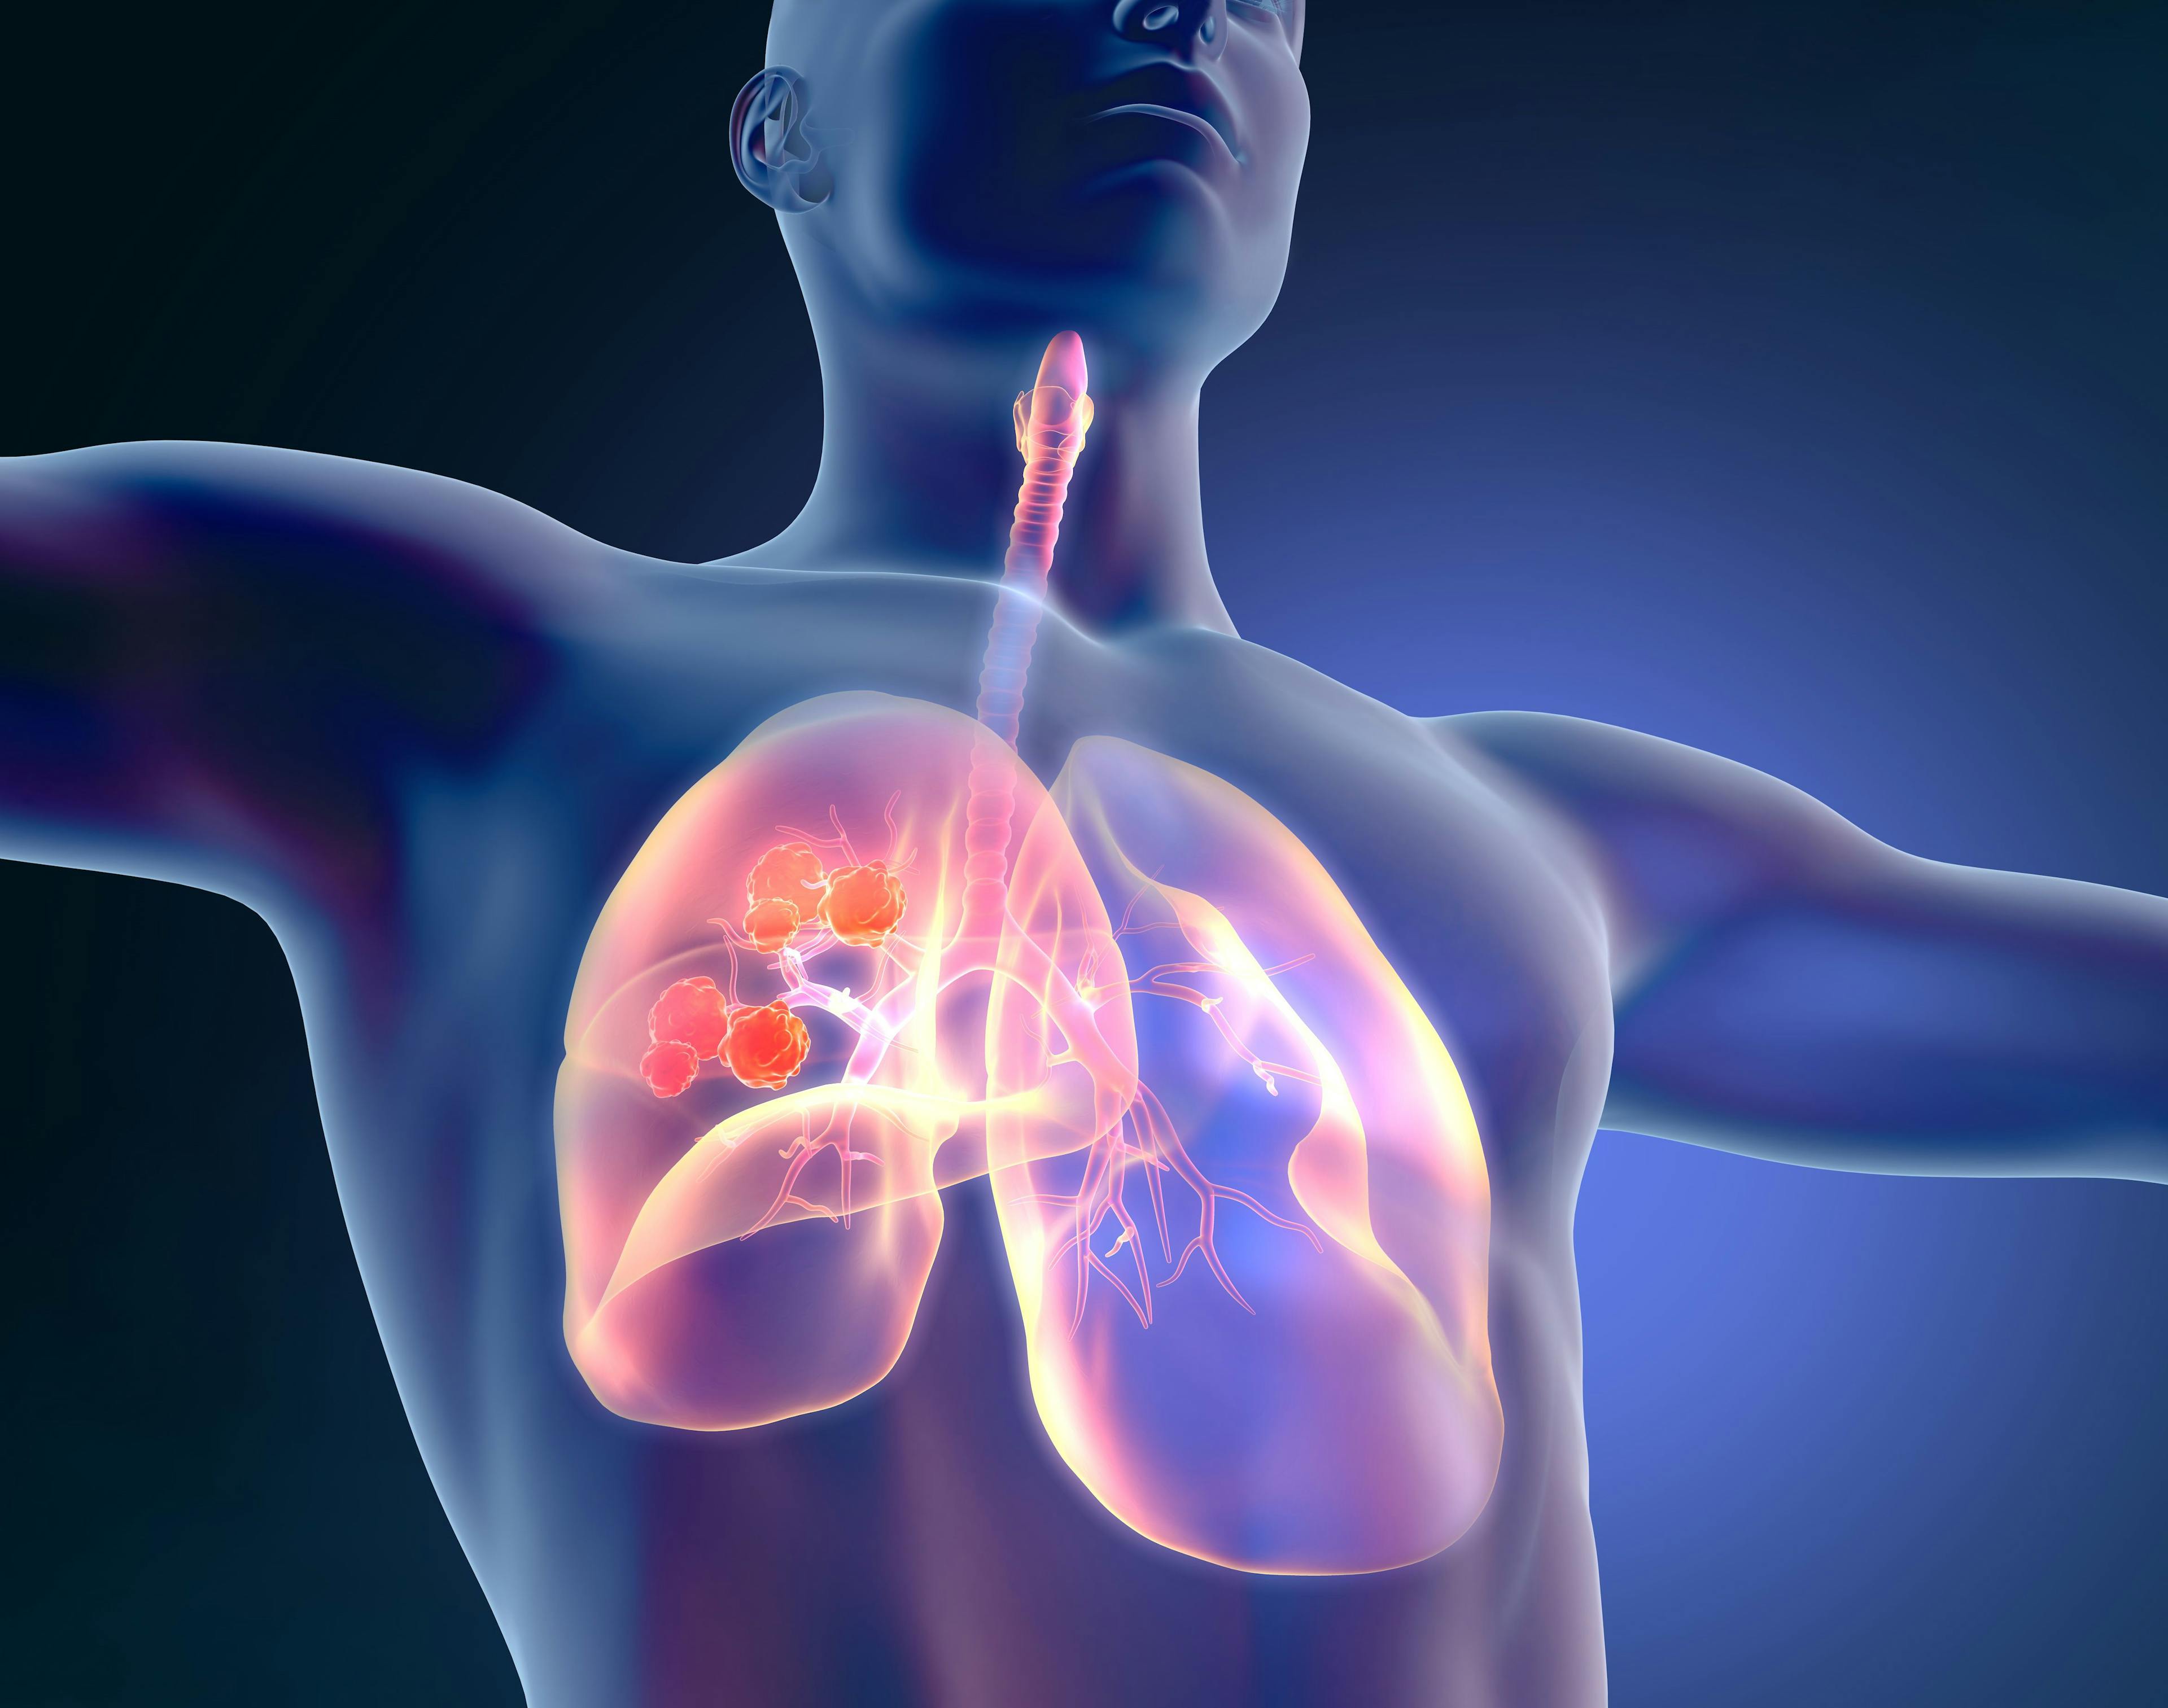 Standard Treatment May Not Be Best for Exon 20-Mutant Lung Cancer